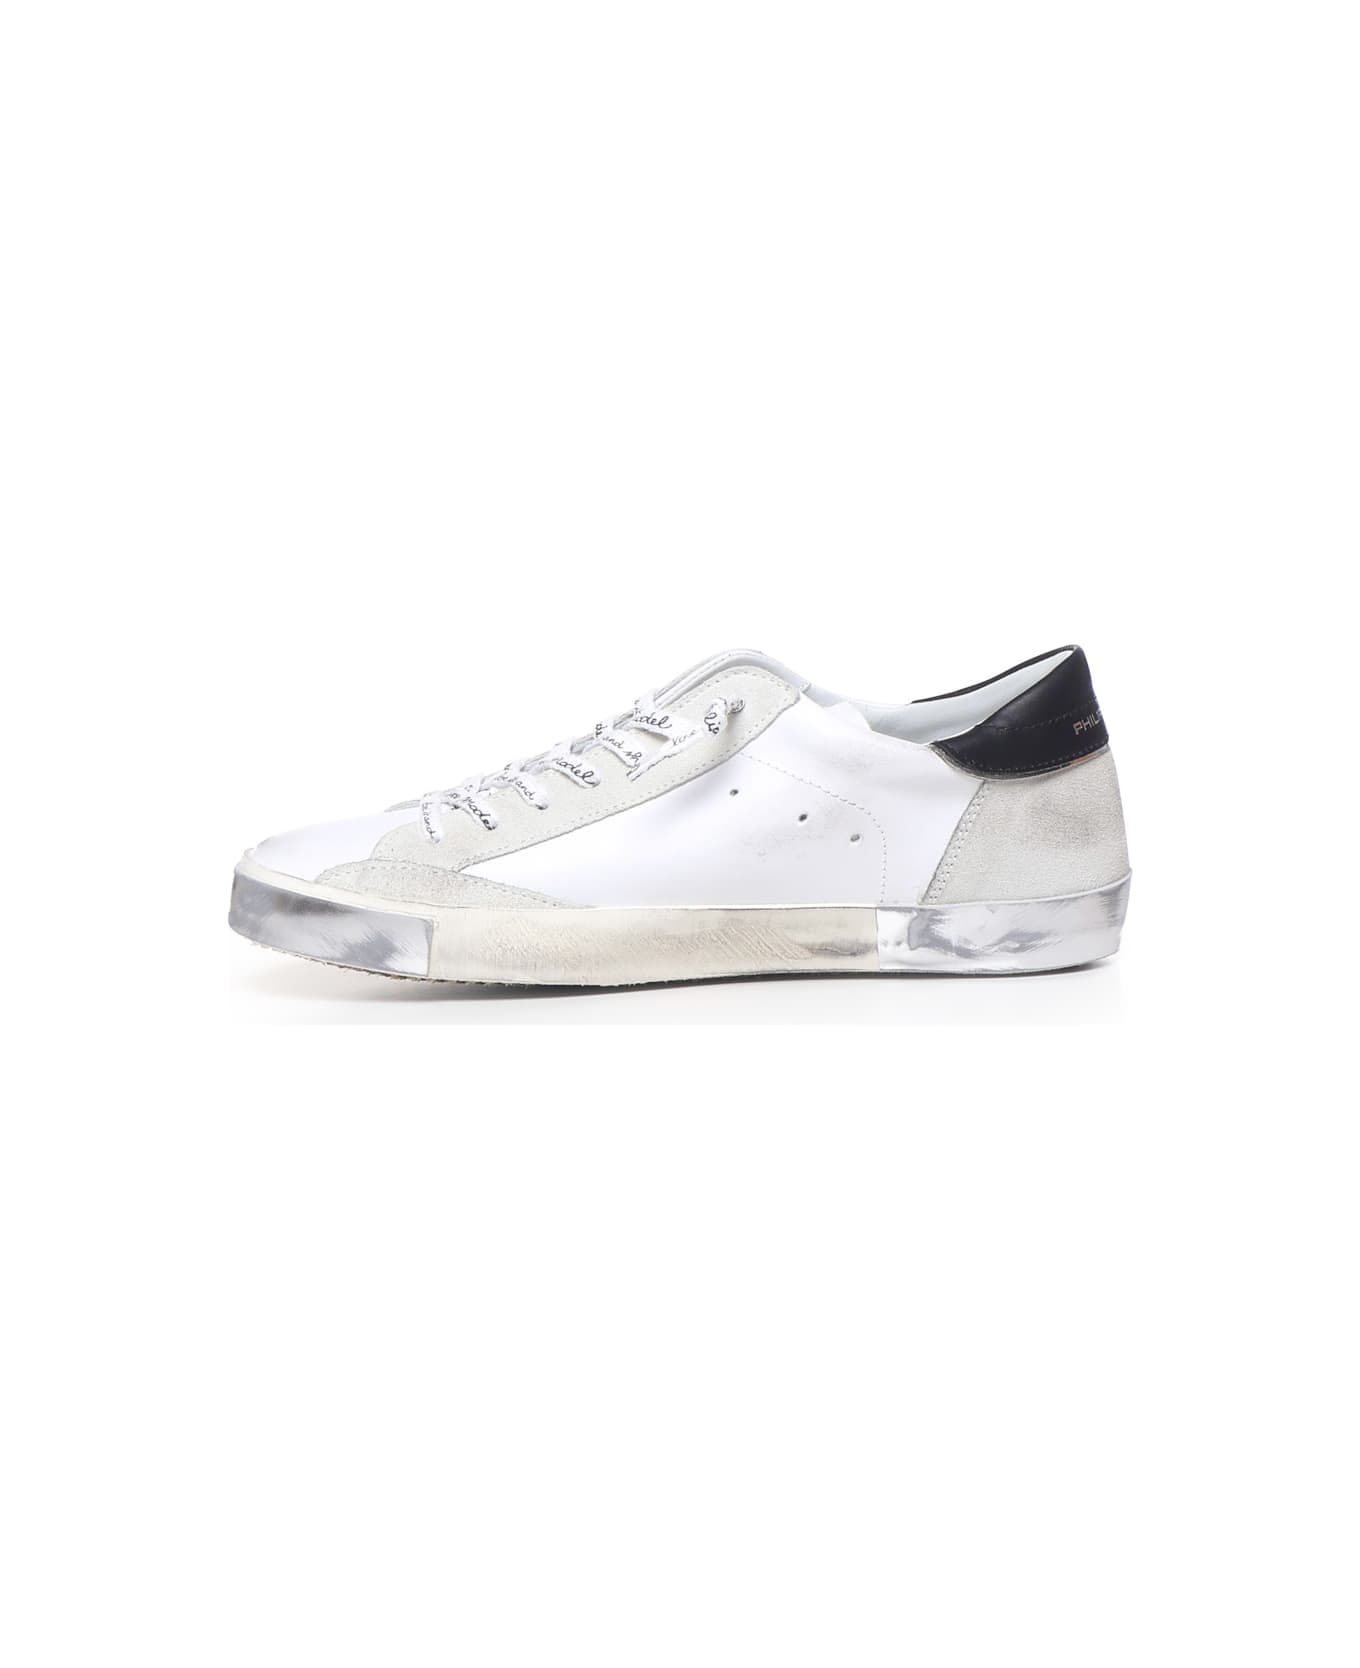 Philippe Model Parisx Sneakers In Leather With Contrasting Heel Tab - White